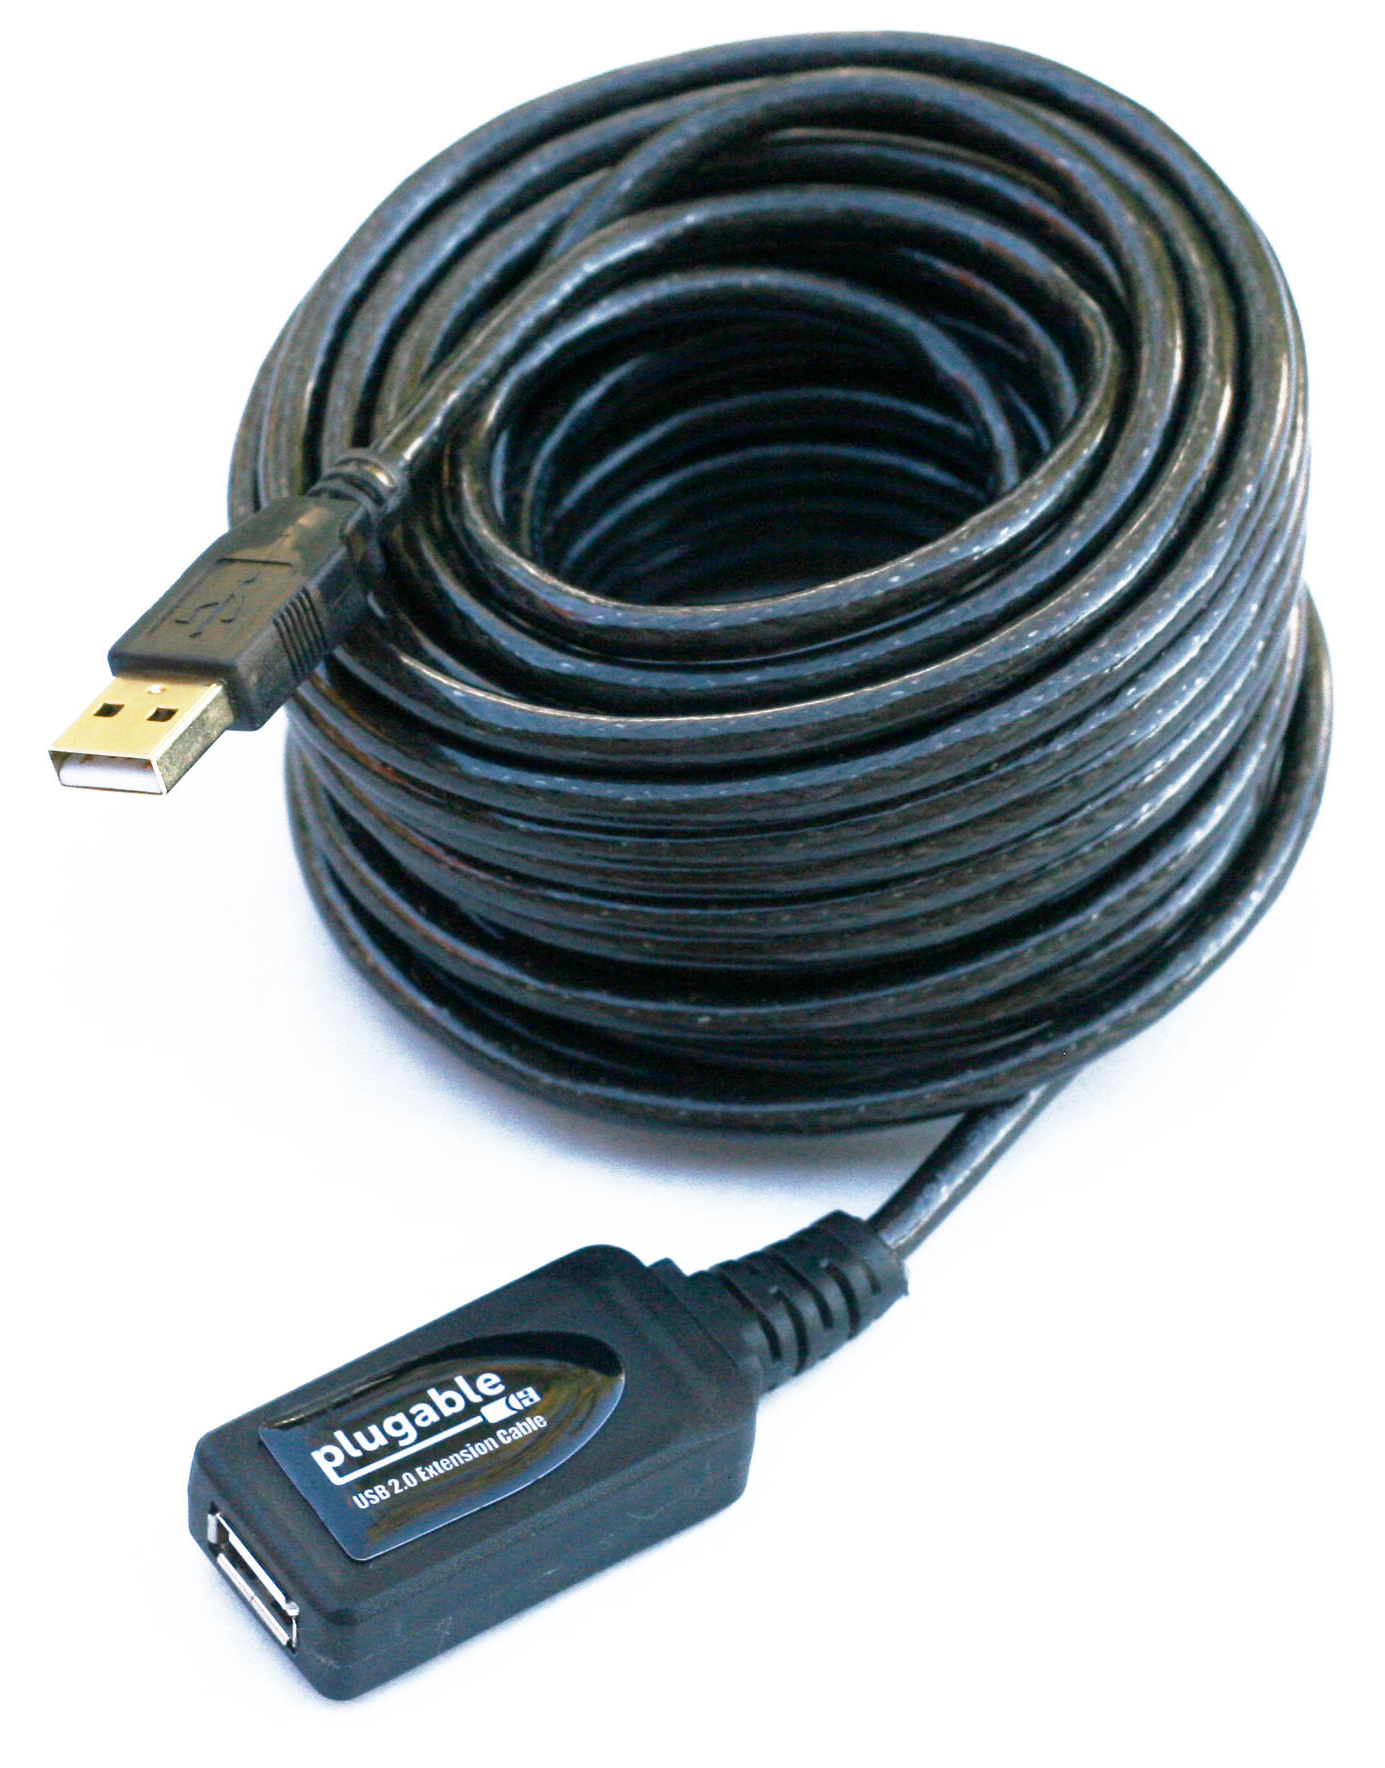 Plugable 10 Meter (32 Foot) USB 2.0 Active Extension Cable Type A Male to A Female - image 1 of 4